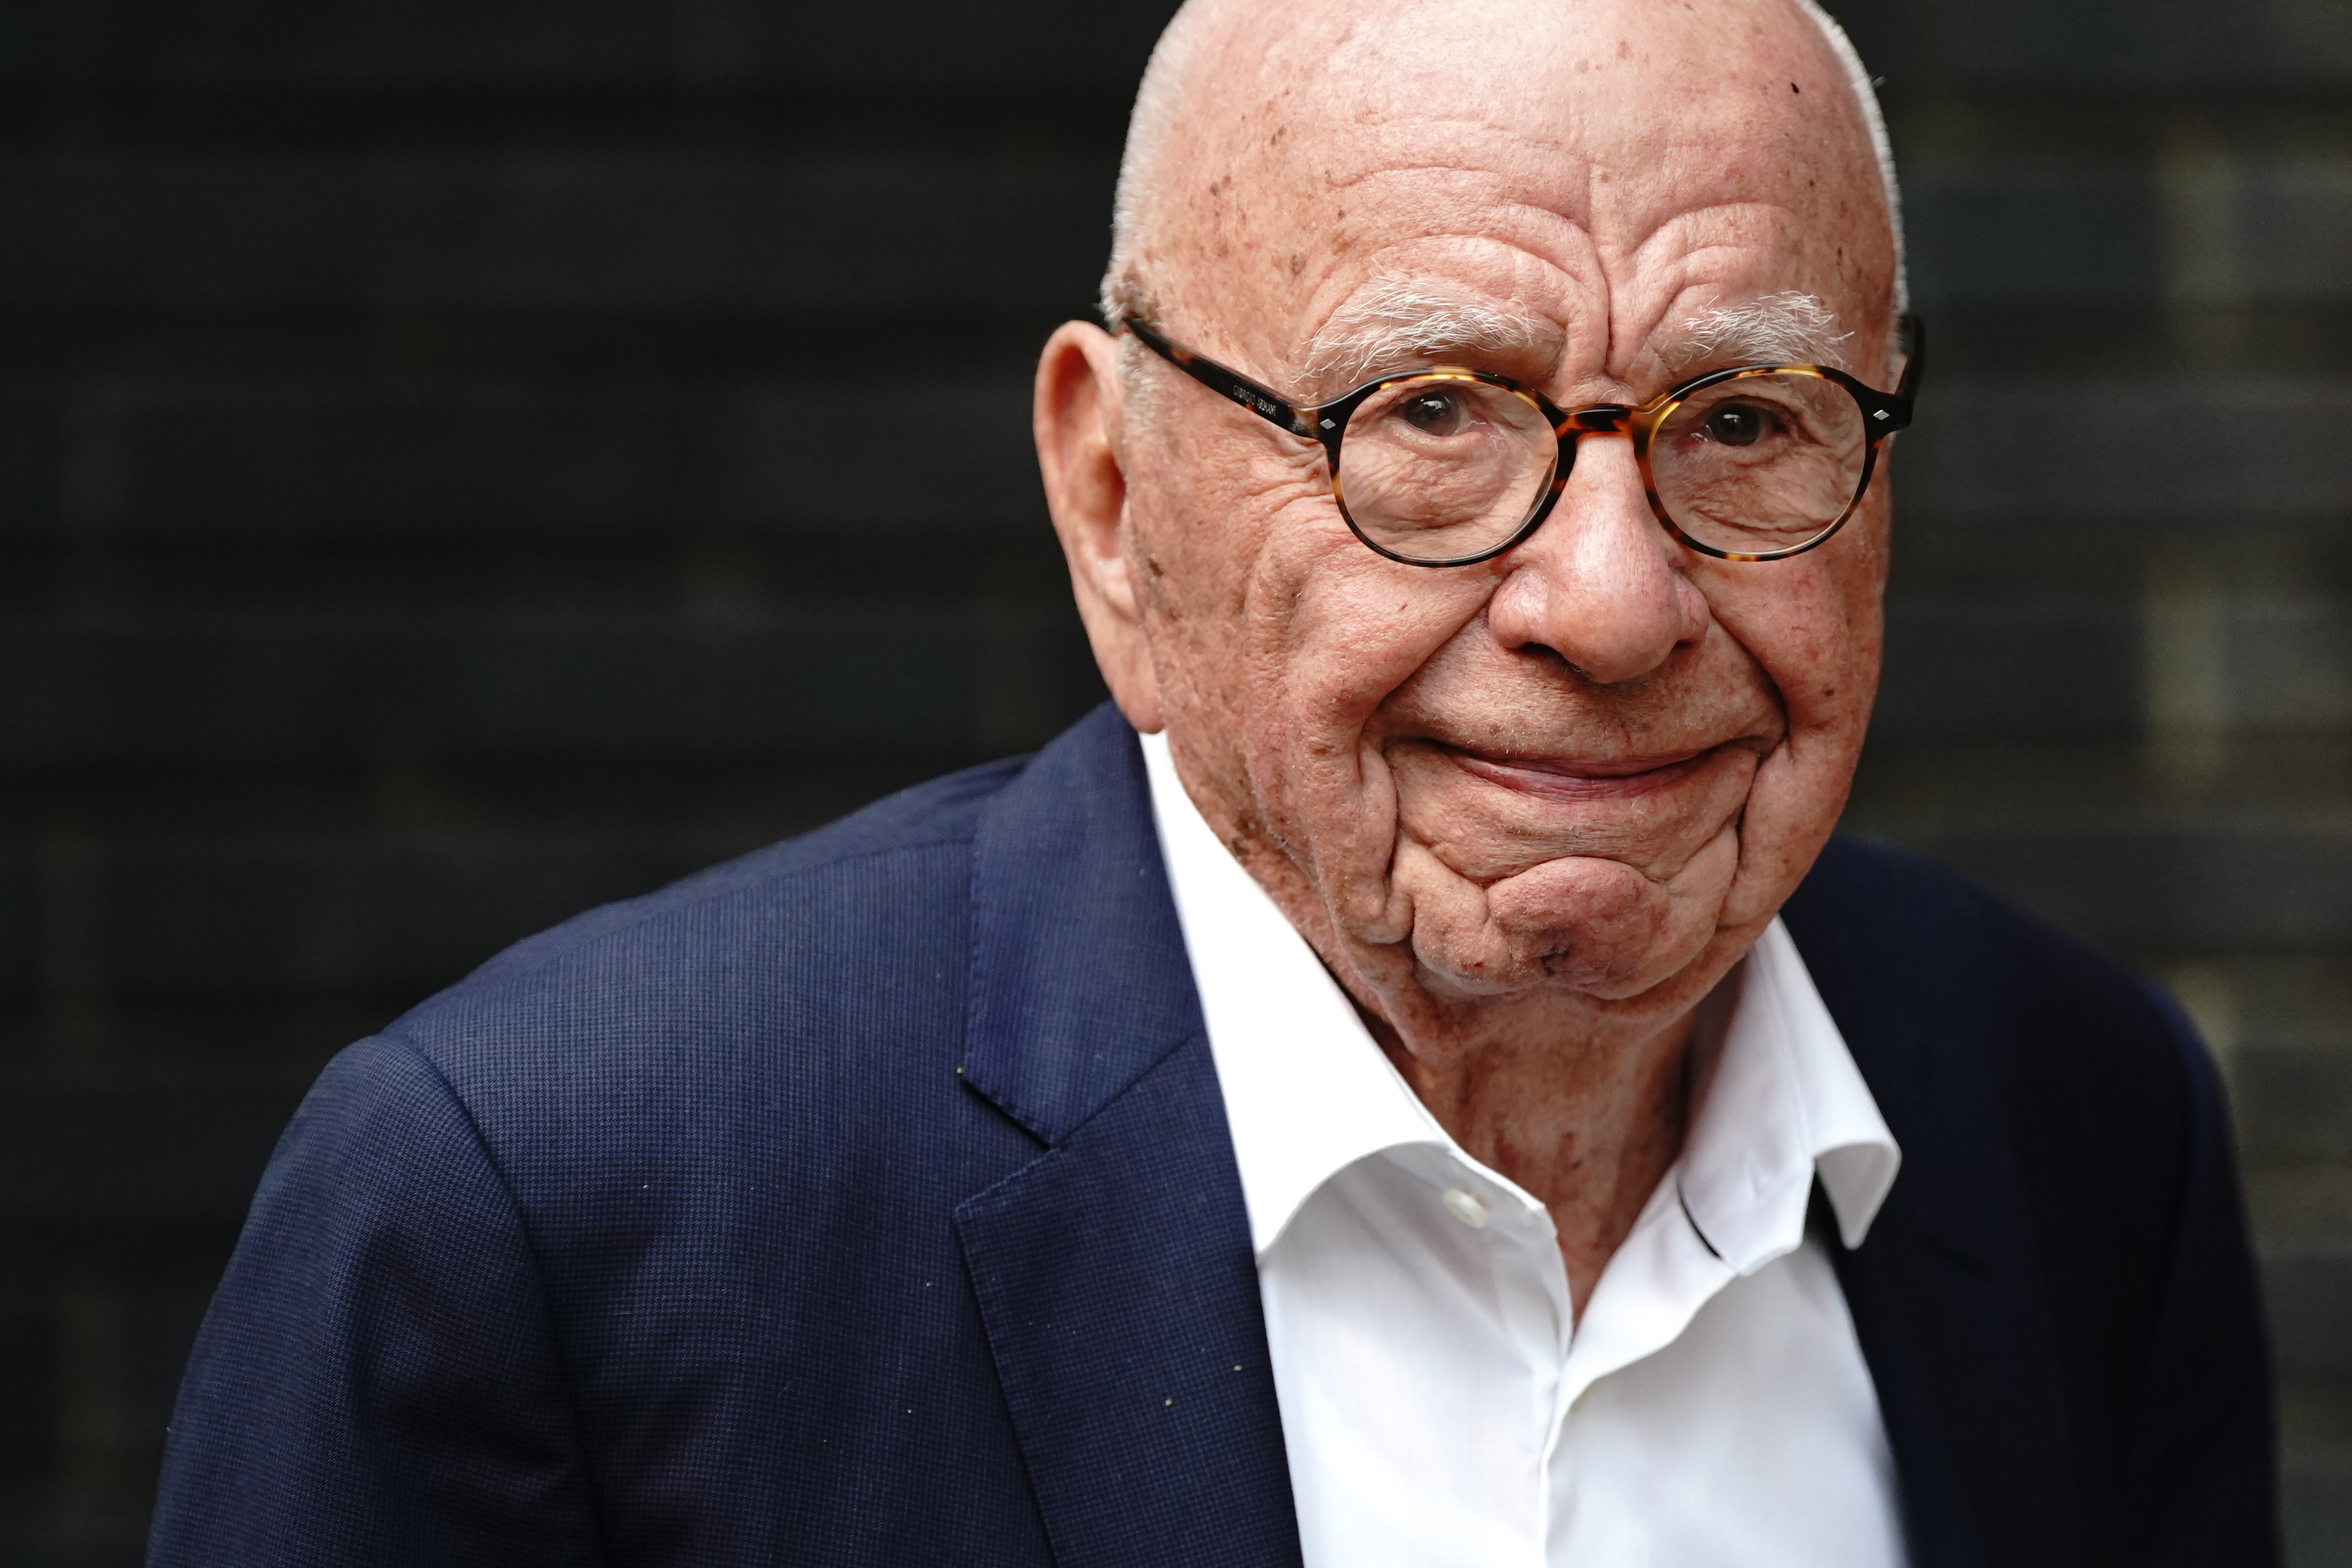 Rupert Murdoch with a slight smile, wearing a blue suit jacket and white shirt open at the throat.